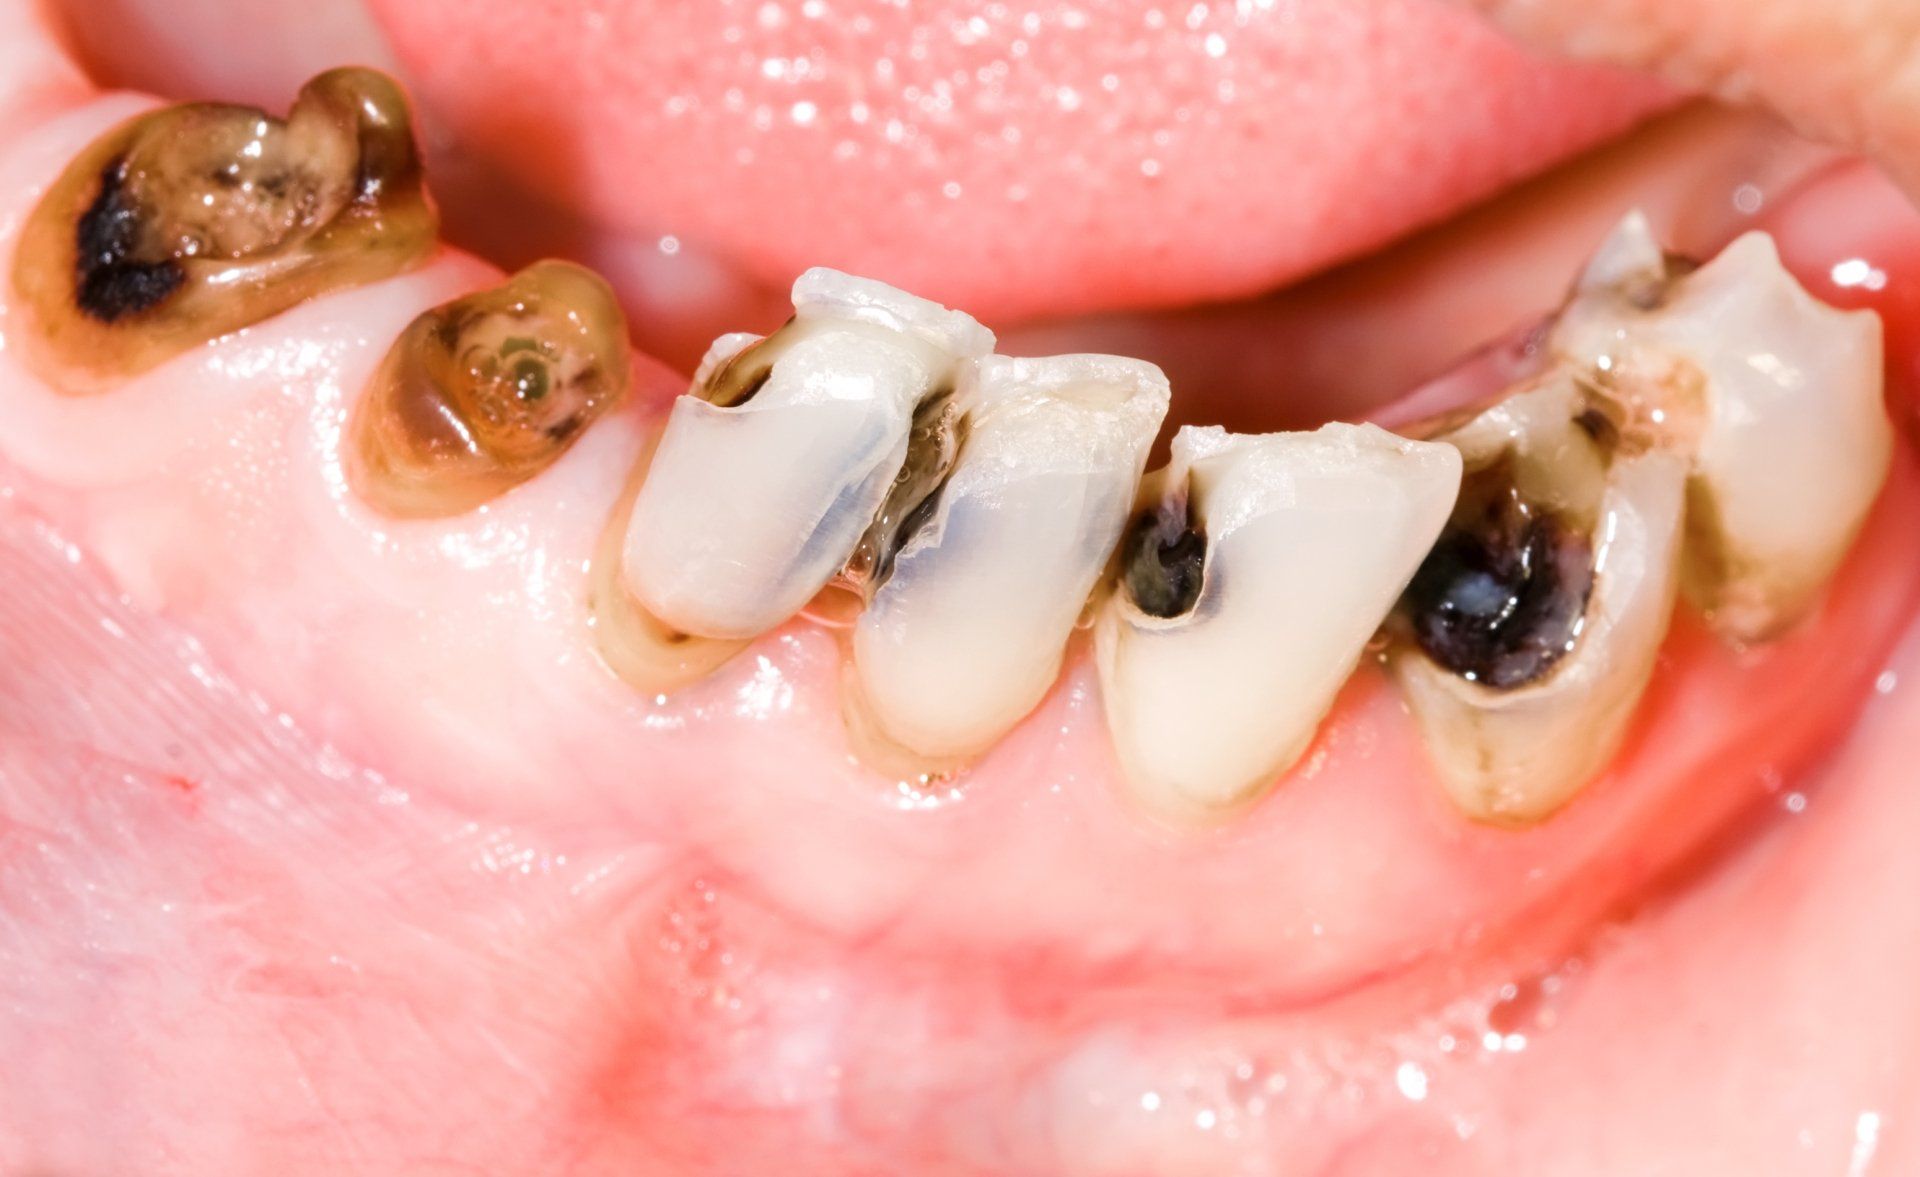 symptoms of tooth decay